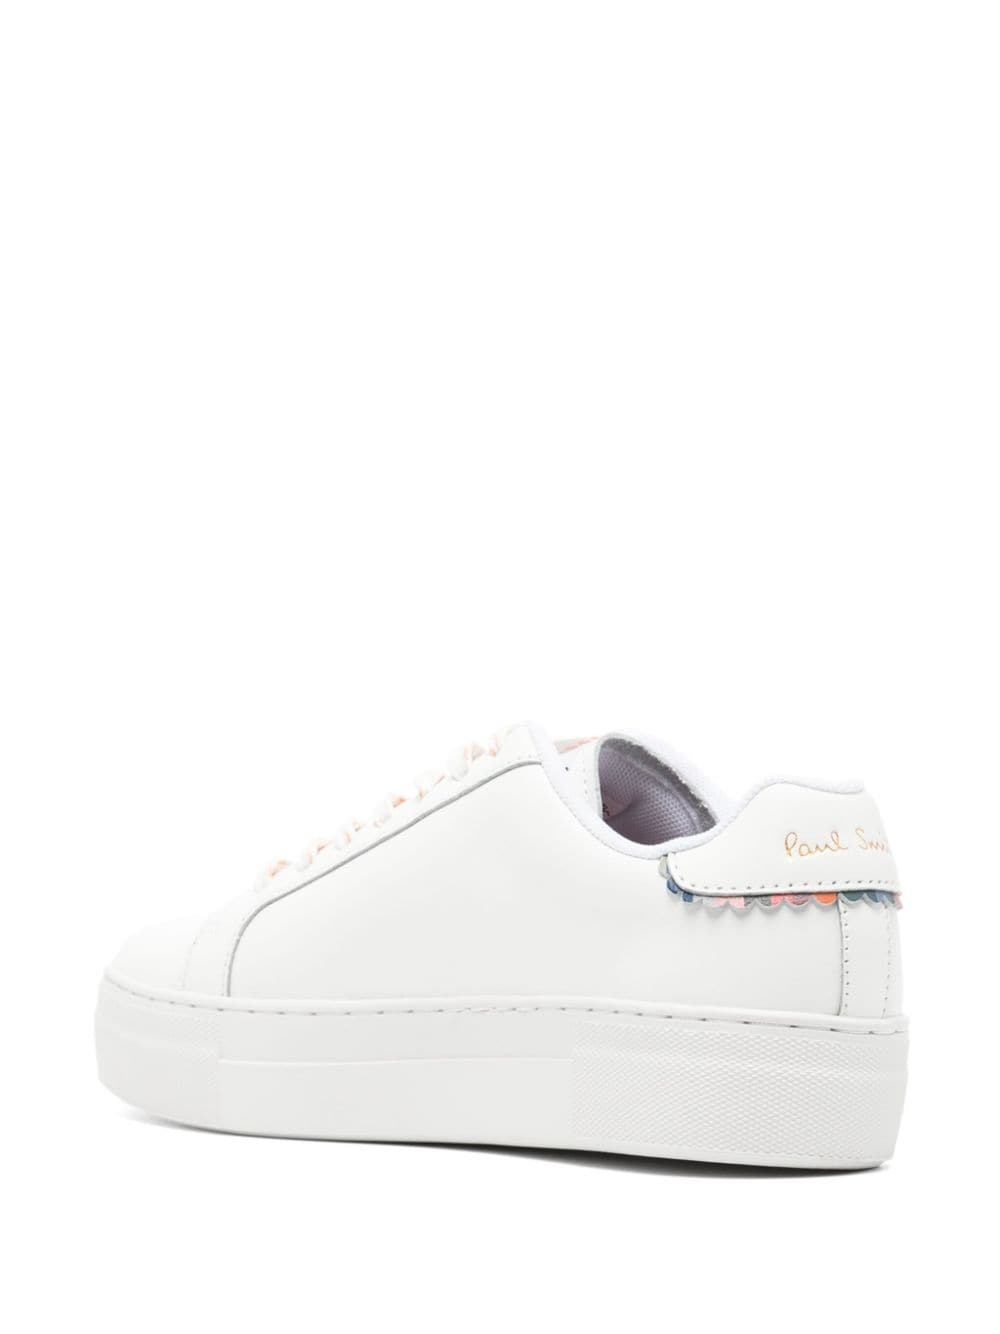 Kelly leather sneakers - 3